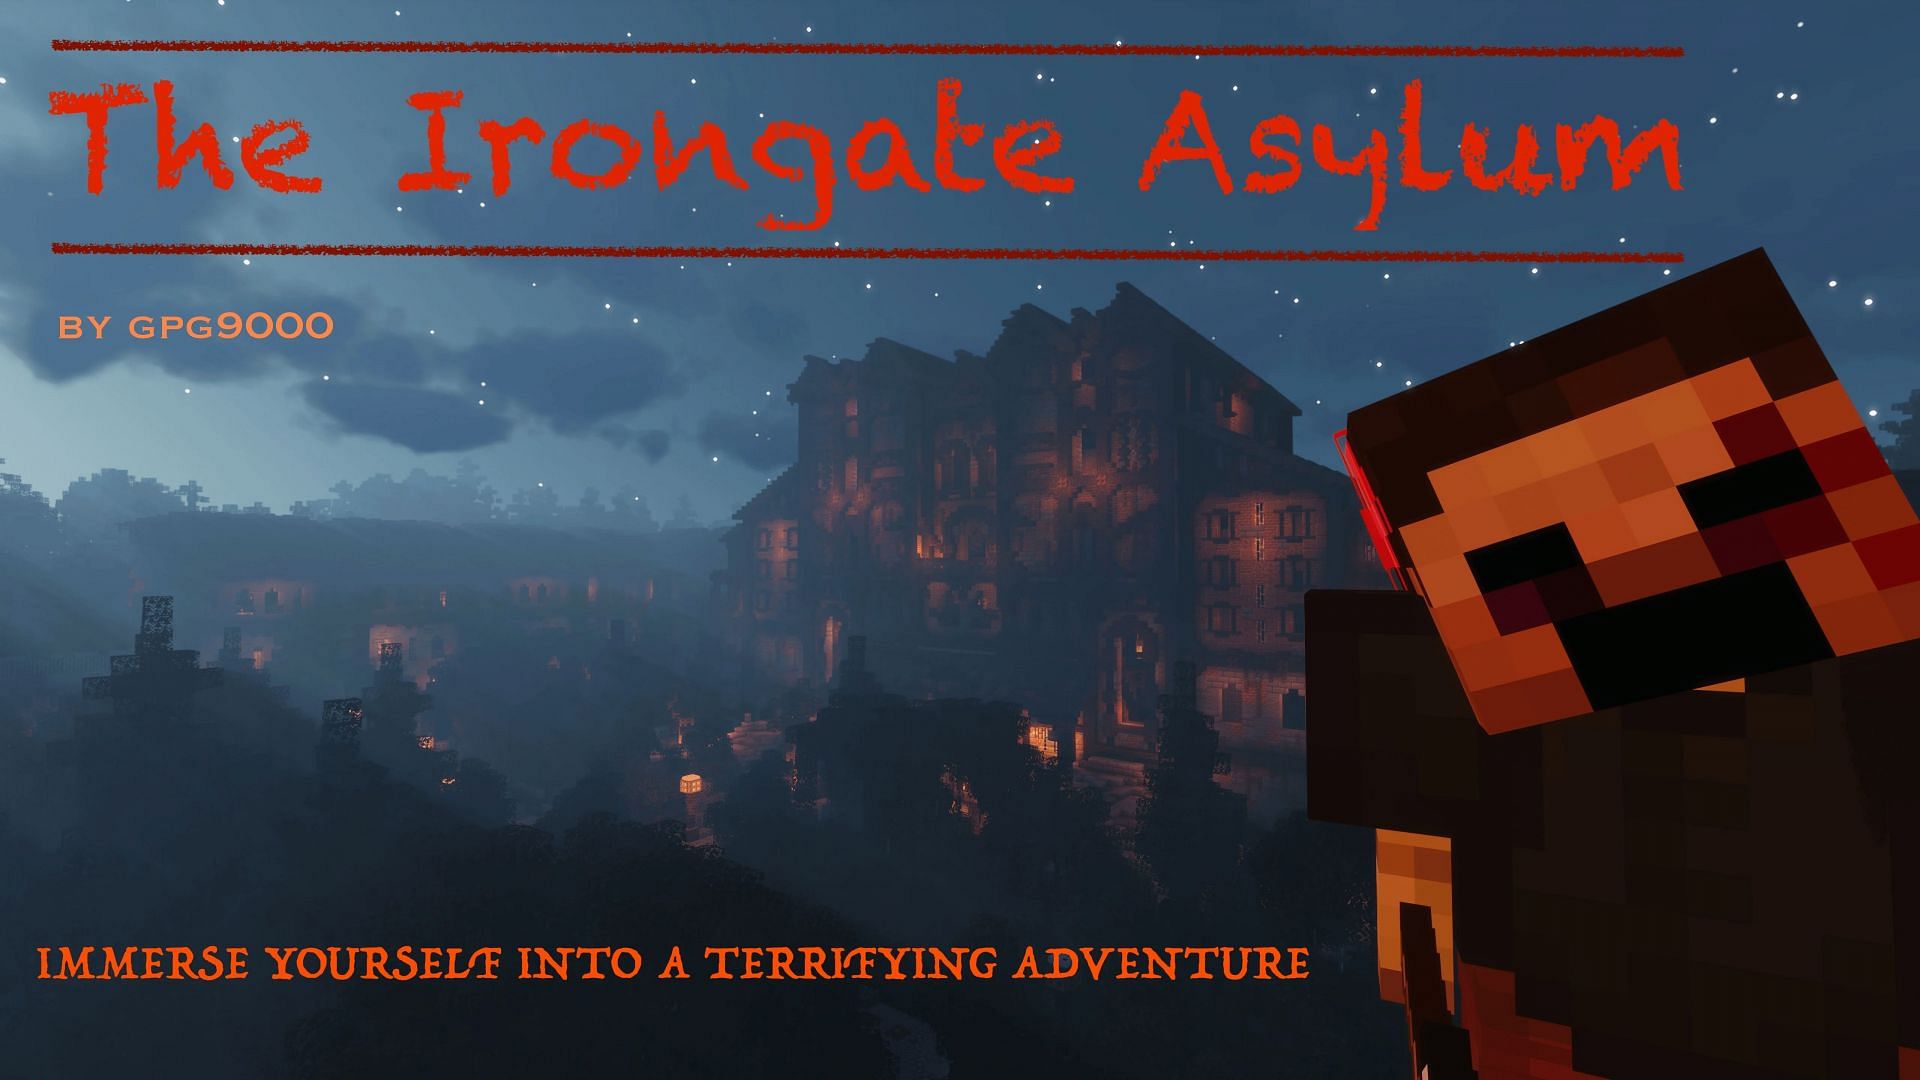 Irongate Asylum is inspired by the game Outlast (Image via GPG9000/MinecraftMaps.com)